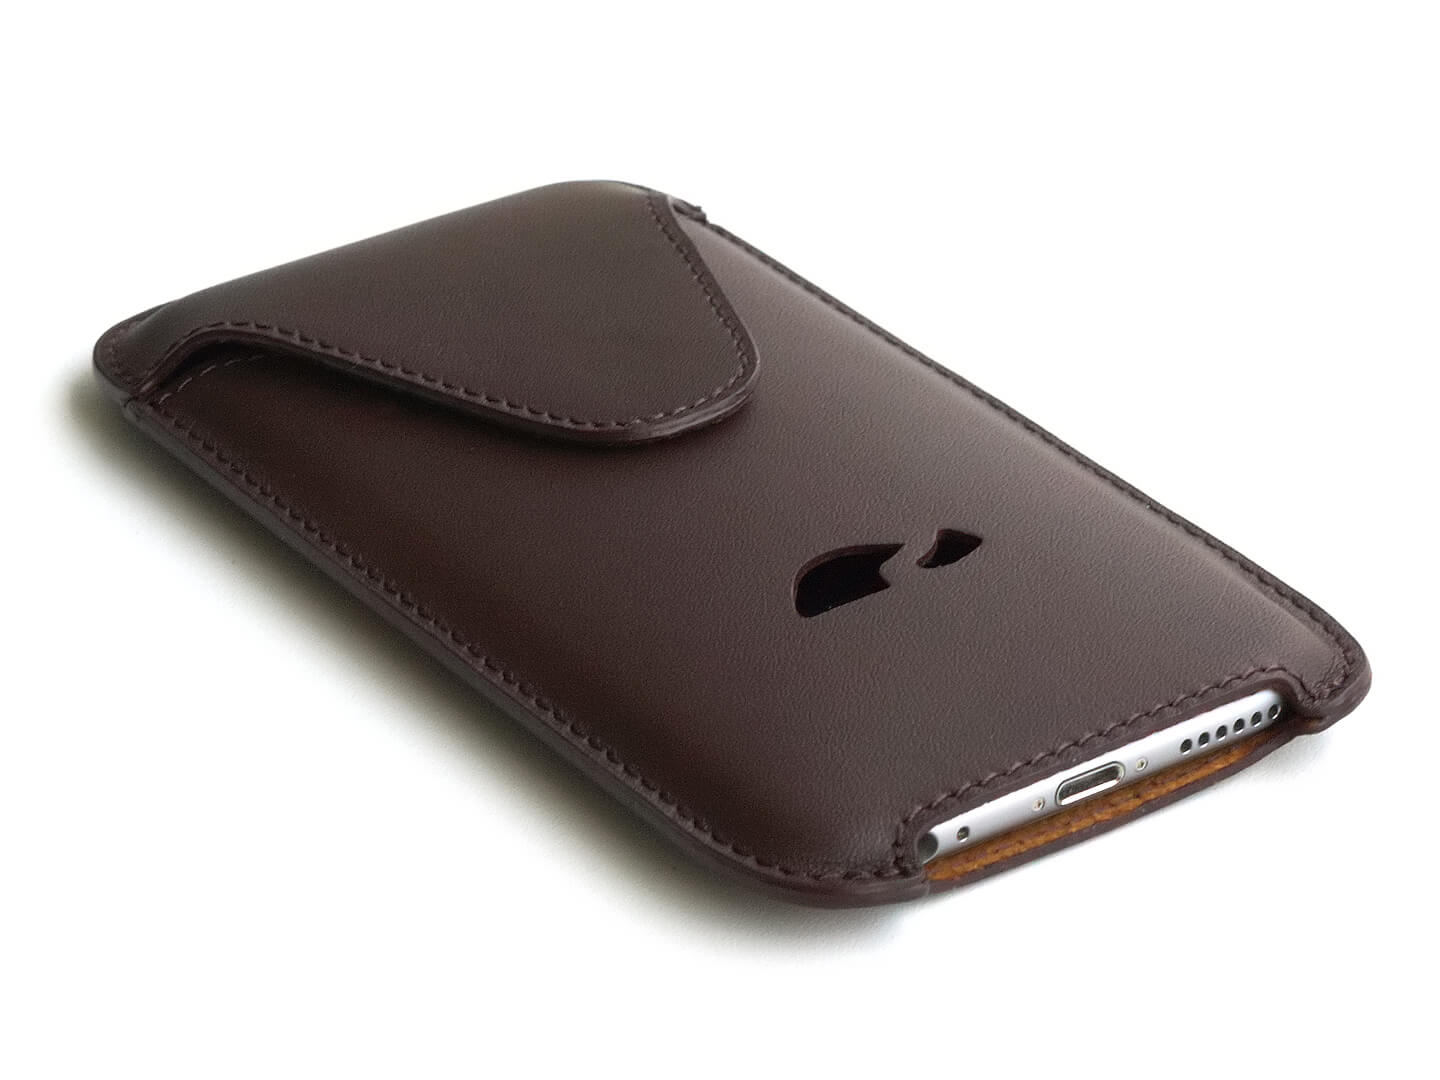 Leather Pouch iPhone 6 / 7 / 8 Plus XS Max slim design - brown - Carapaz